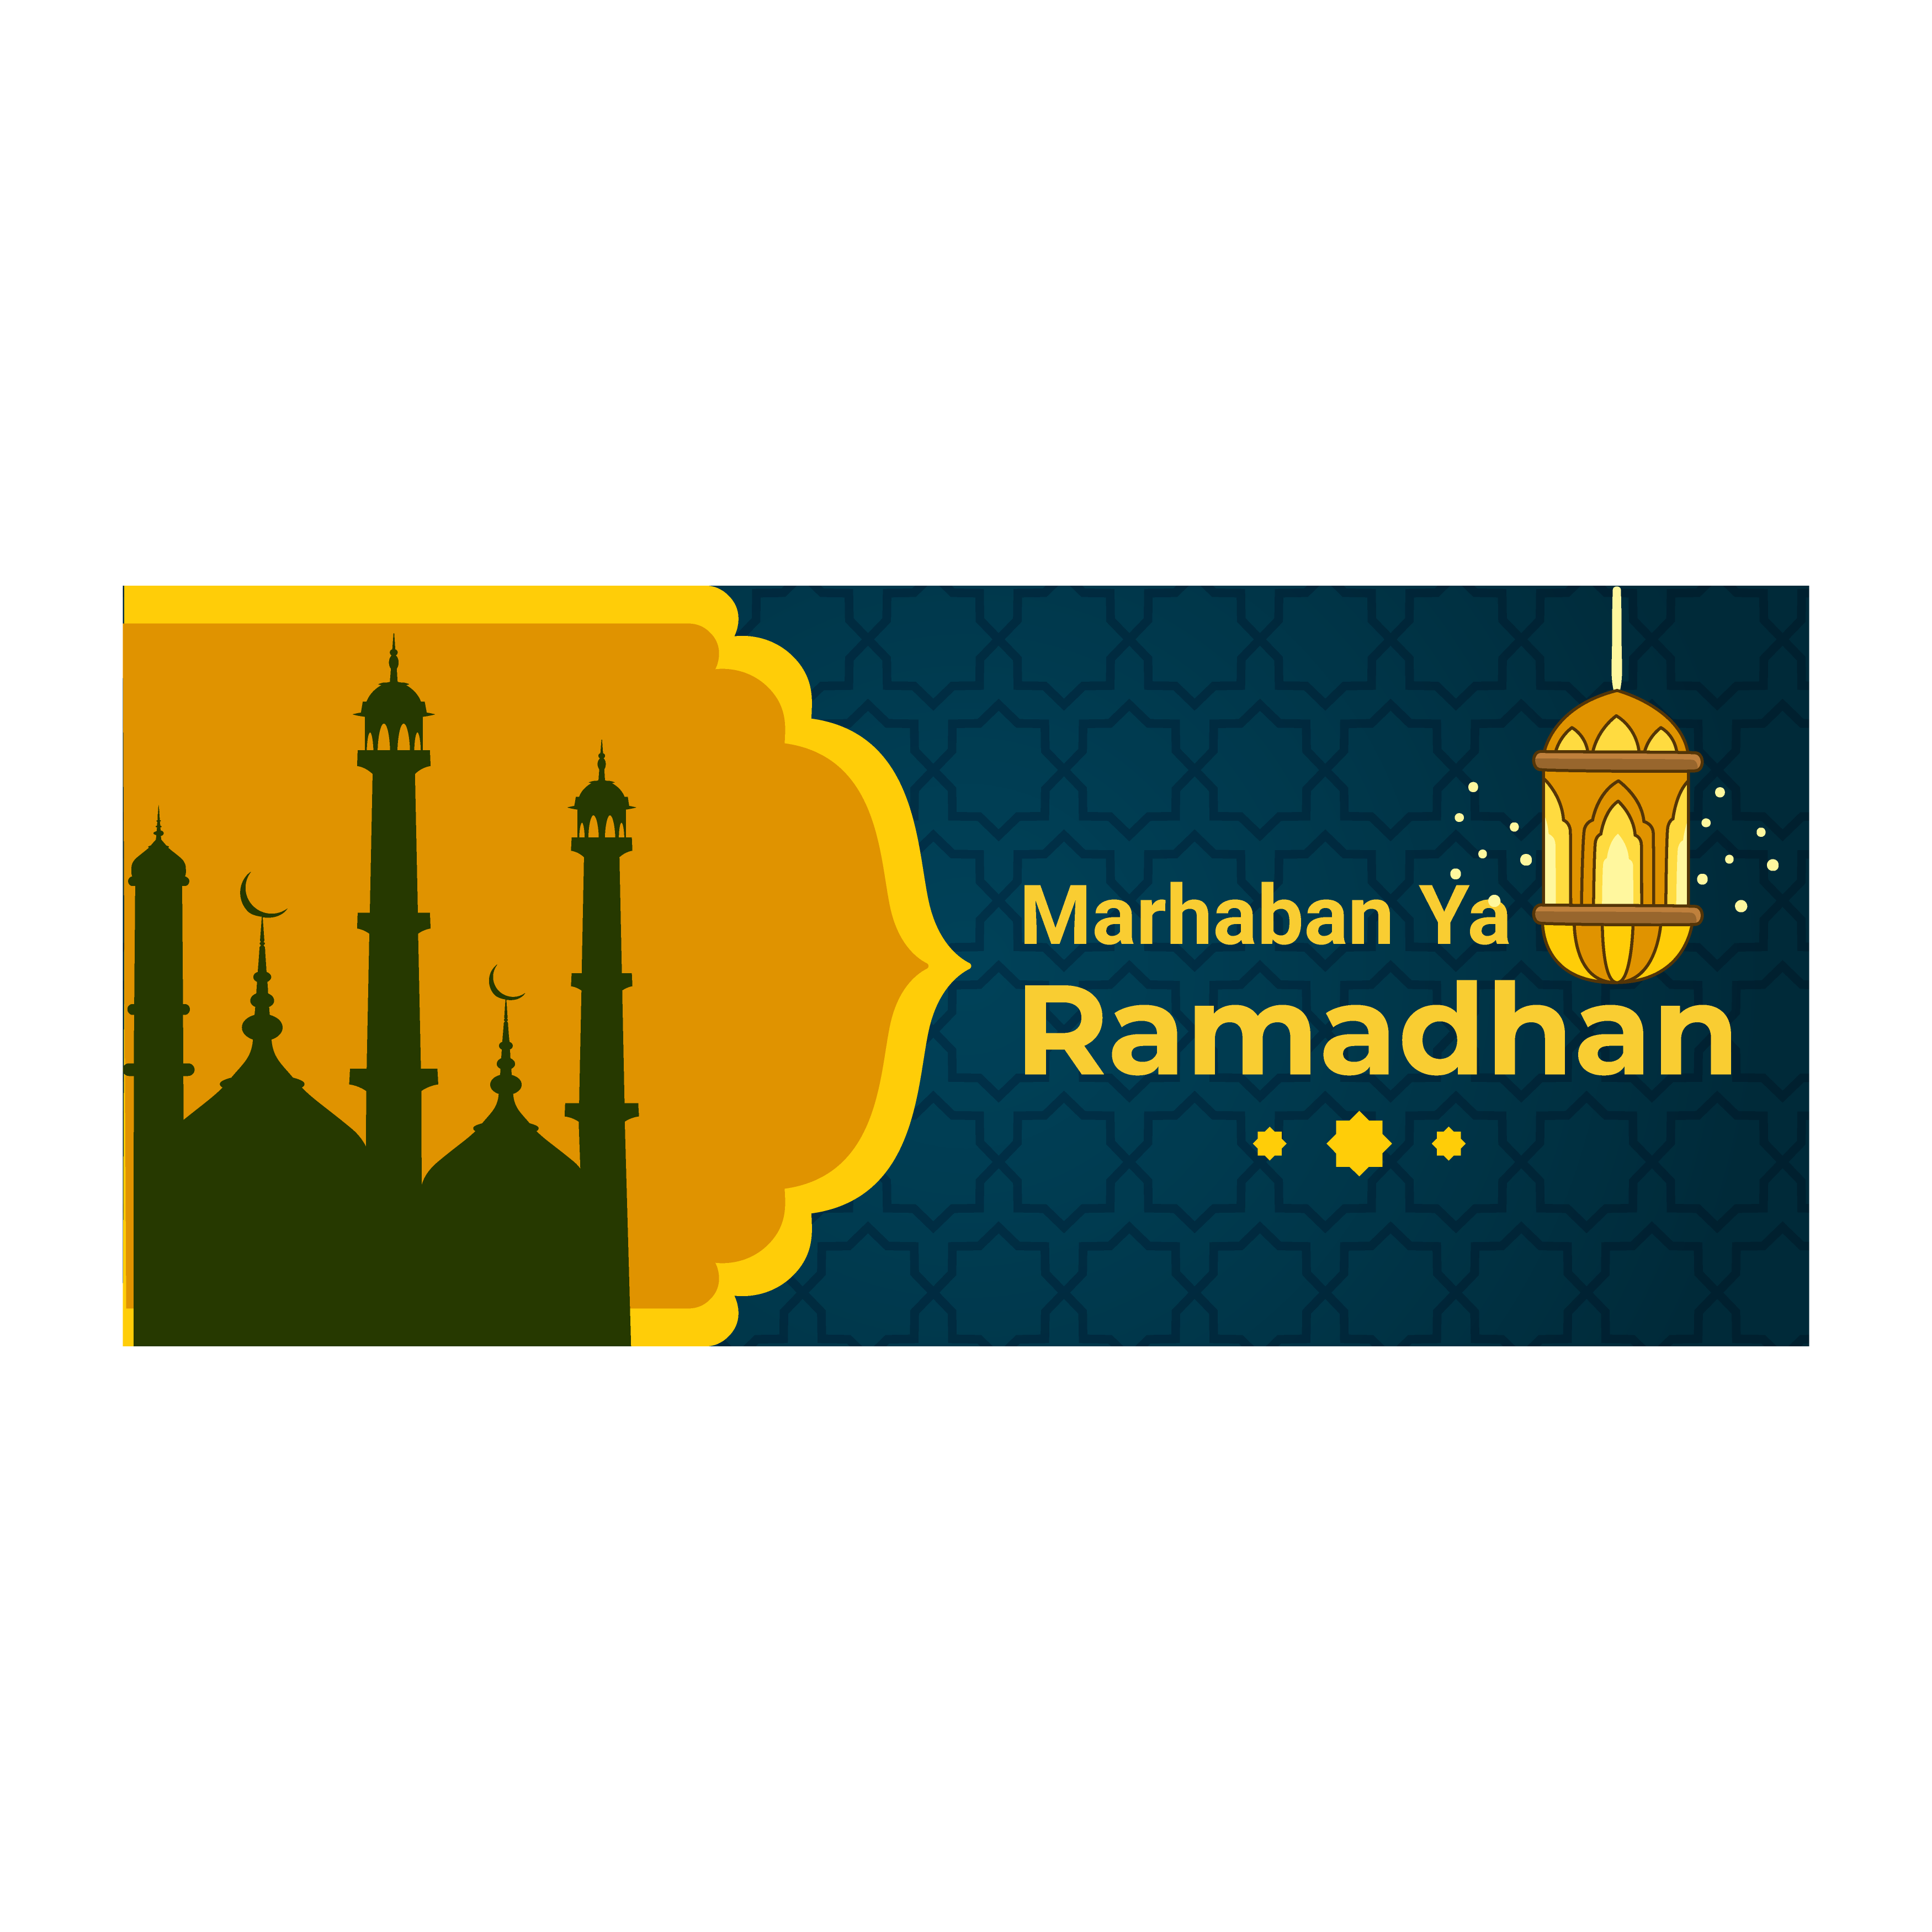 Blue And Yellow Ornate Ramadan Banner With Mosque Download Free Vectors Clipart Graphics Vector Art